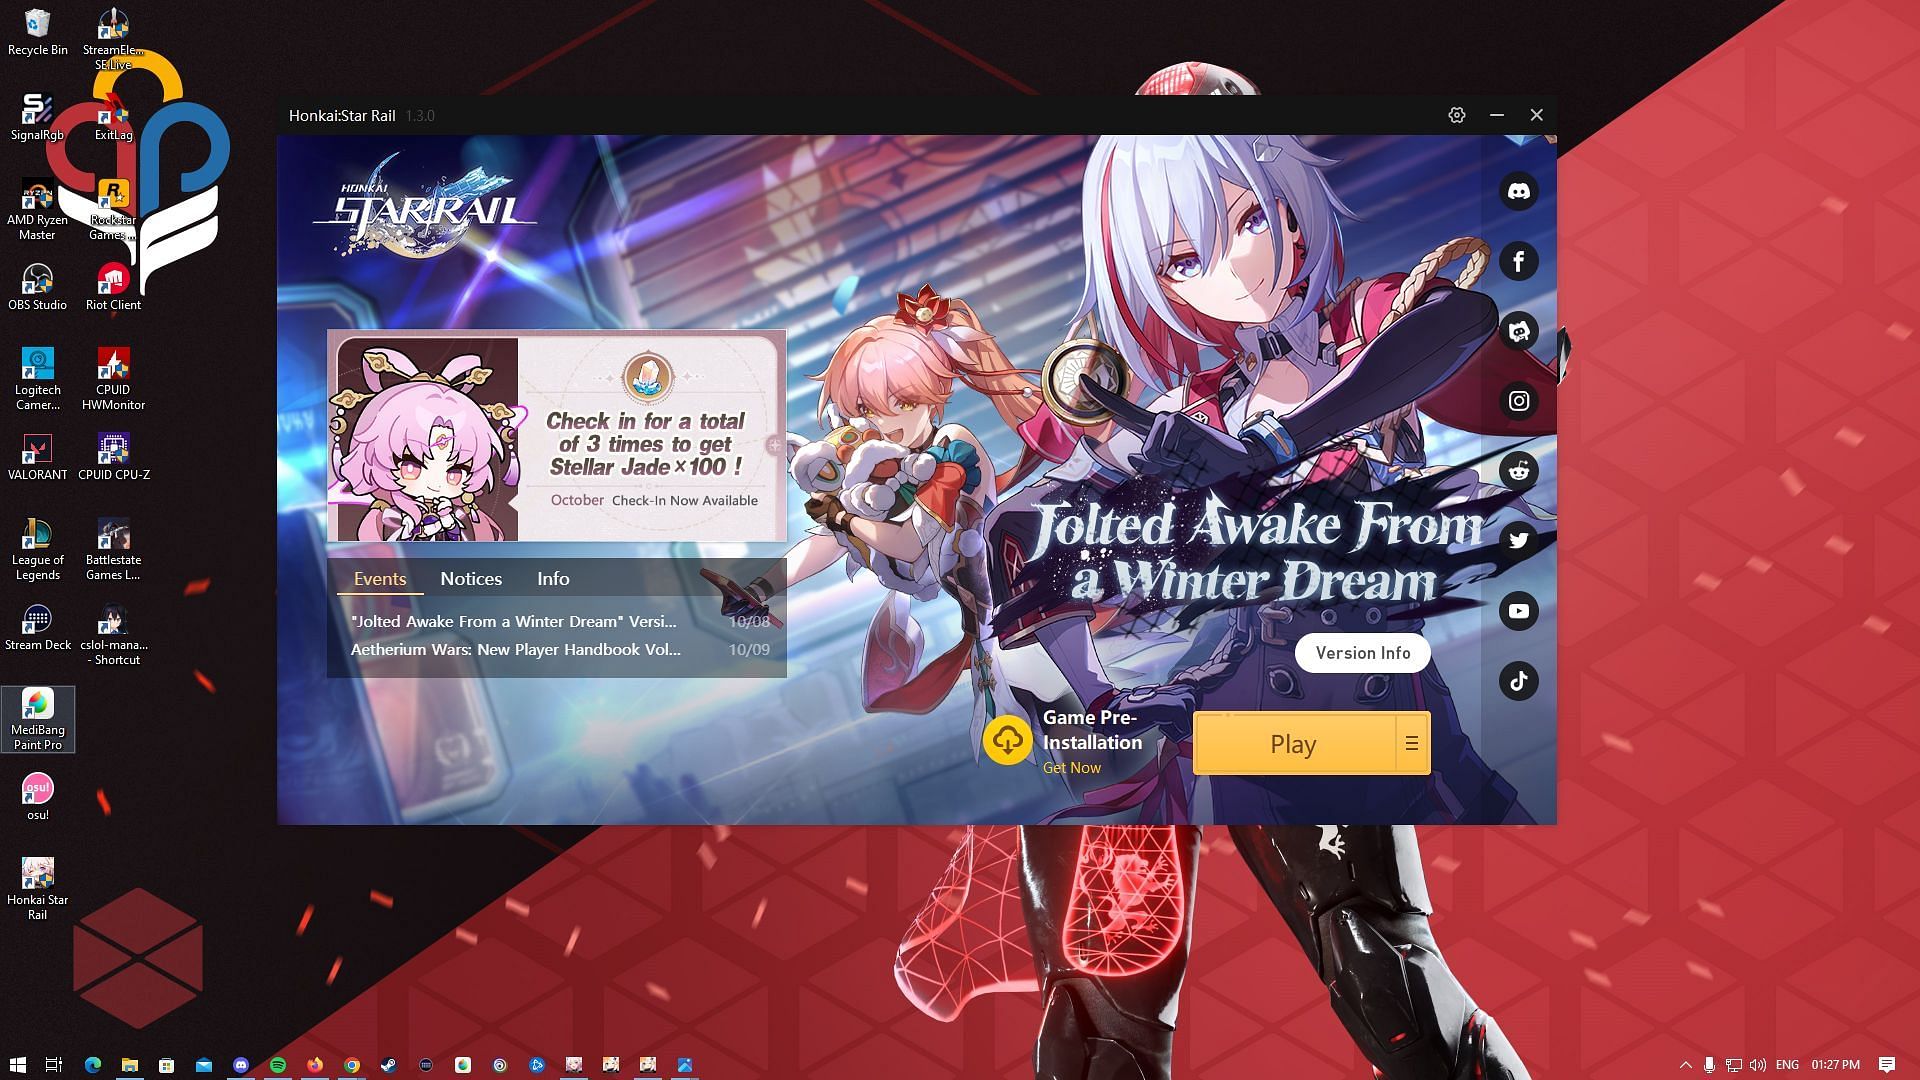 version 1.2 pre-download: How to pre-install Honkai Star Rail version 1.2?  Download size and more